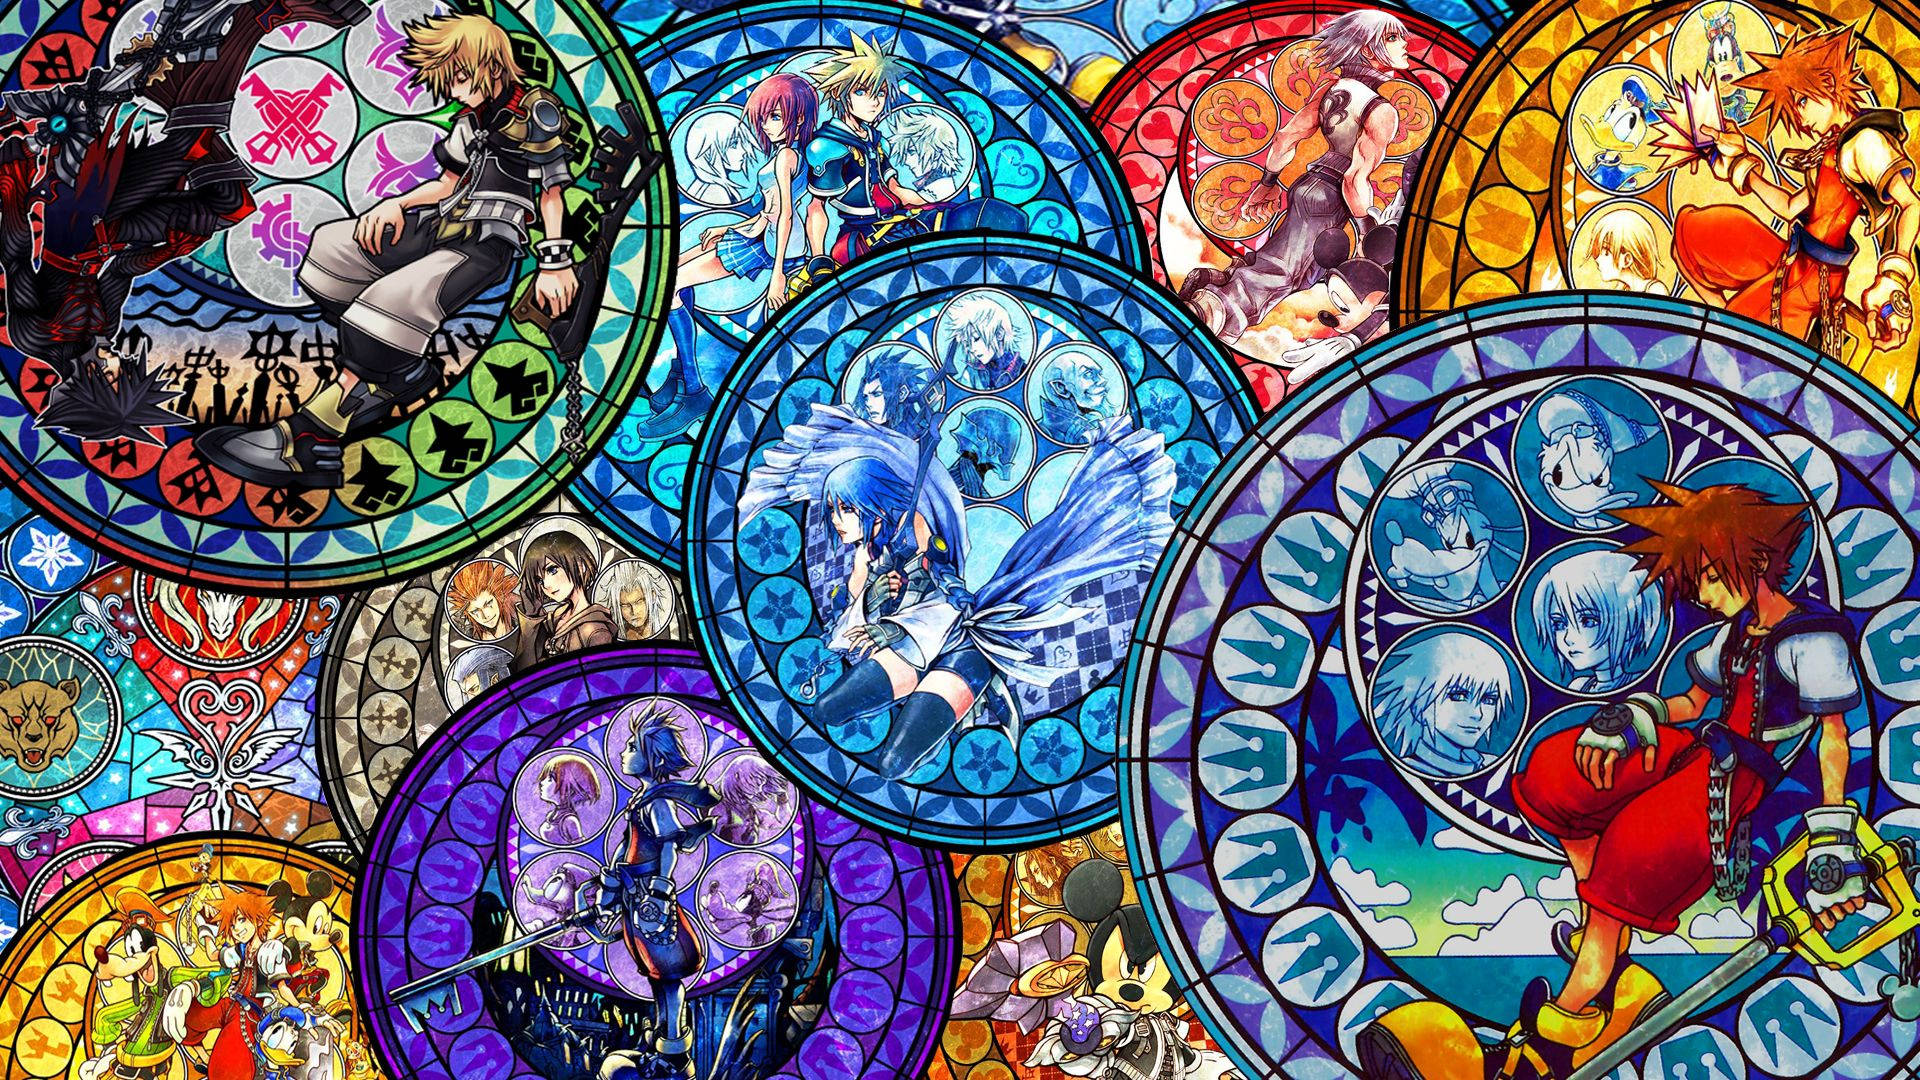 Kingdom Hearts Stained Glass Wallpaper By The Dark Mamba 995